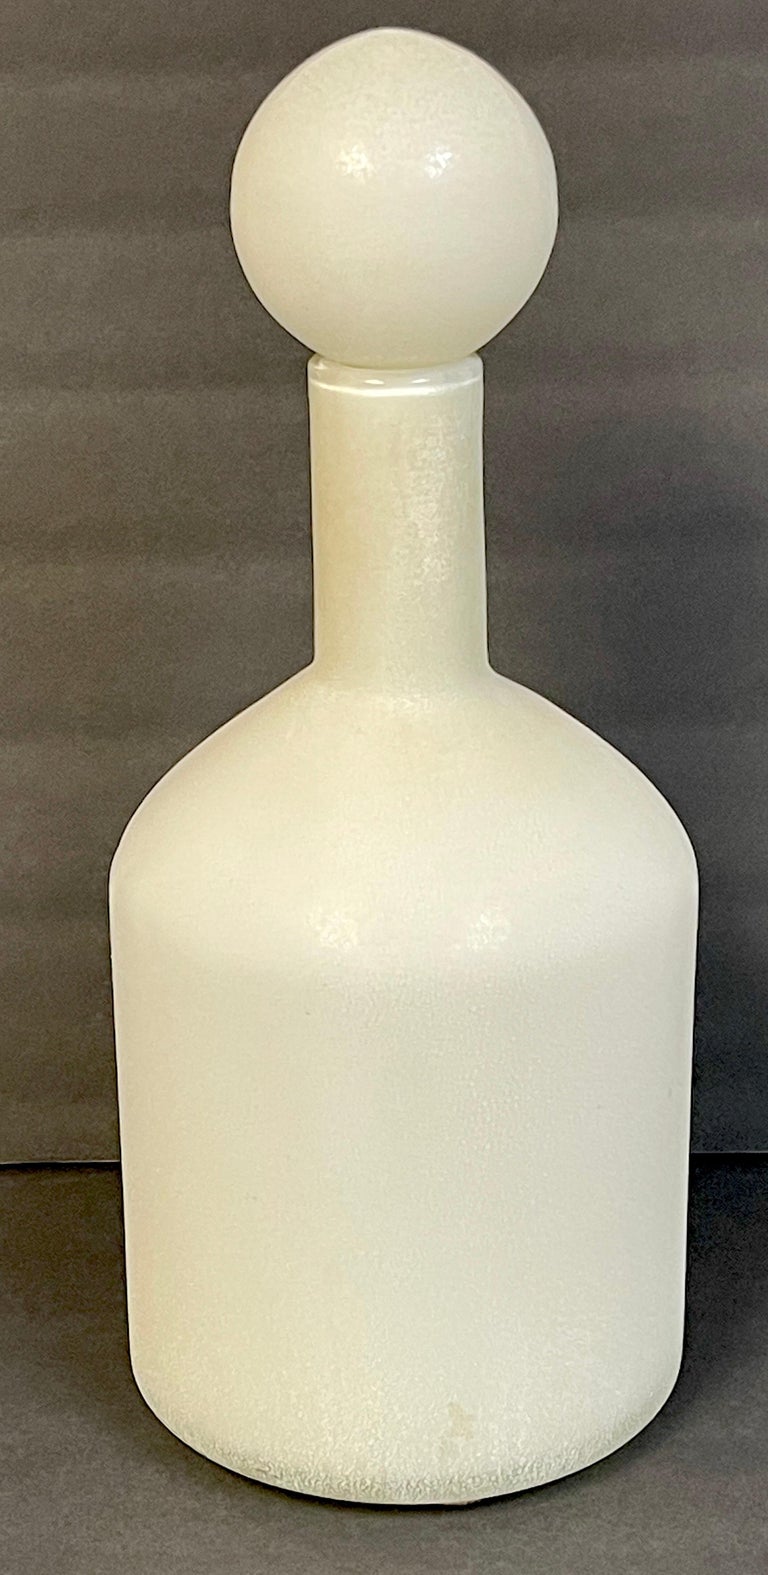 Cenedese murano white-scavo decanter bottle with ball stopper.
Italy, circa 1980s.

We are pleased to offer this large and sculptural (attributed) Cenedese Murano White-Scavo Decanter. Hand blown using the 'Scavo' technique, in this example its a